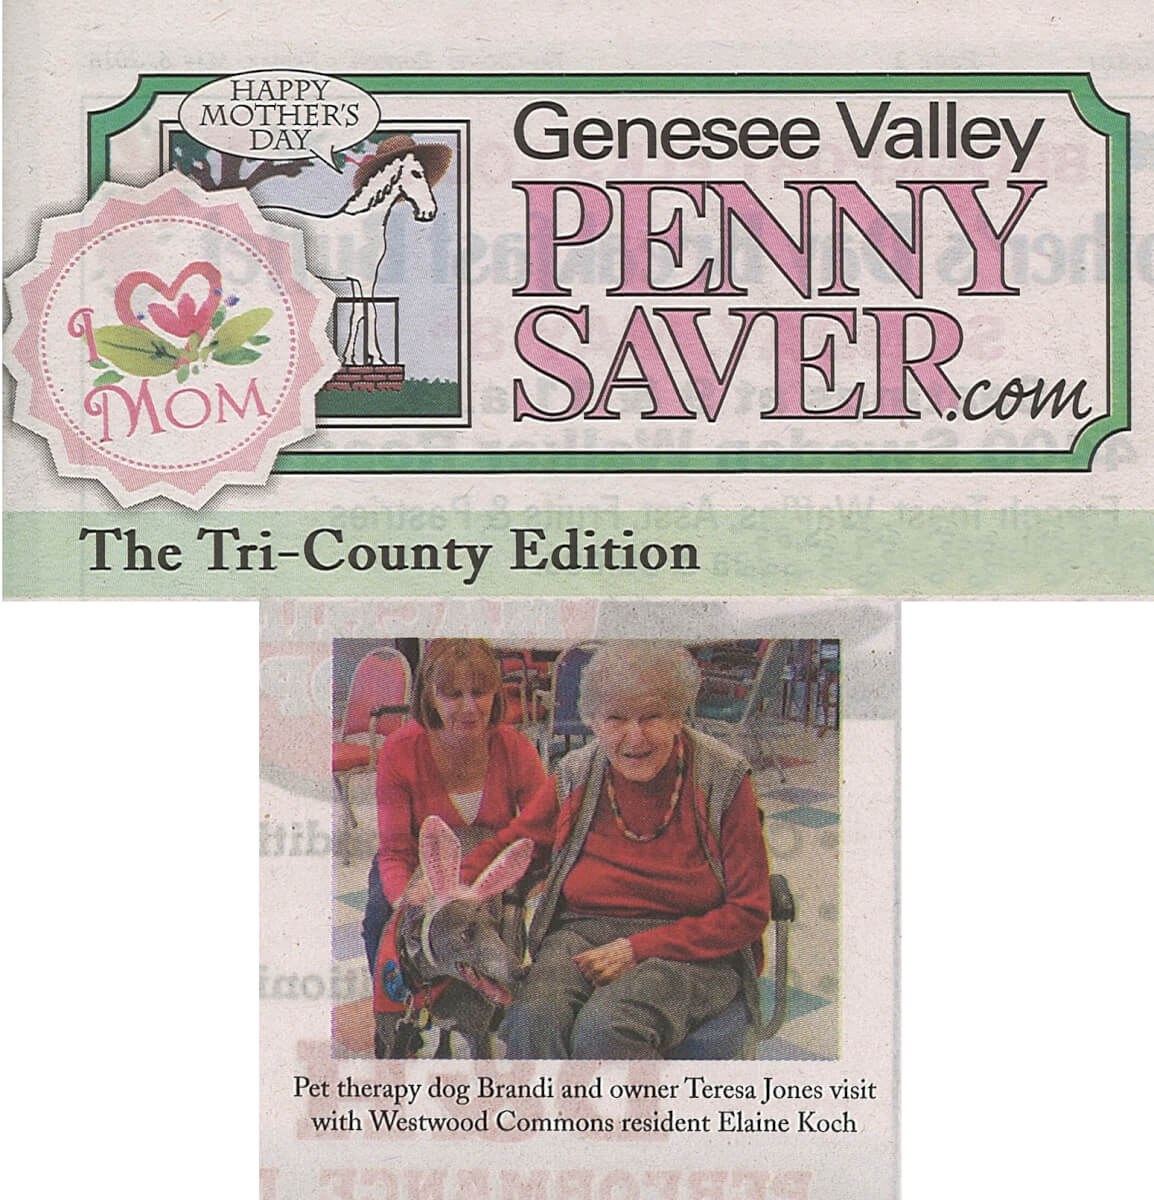 Westwood Commons Pet Therapy photo in the Genesee Valley Penny Saver May 6, 2016